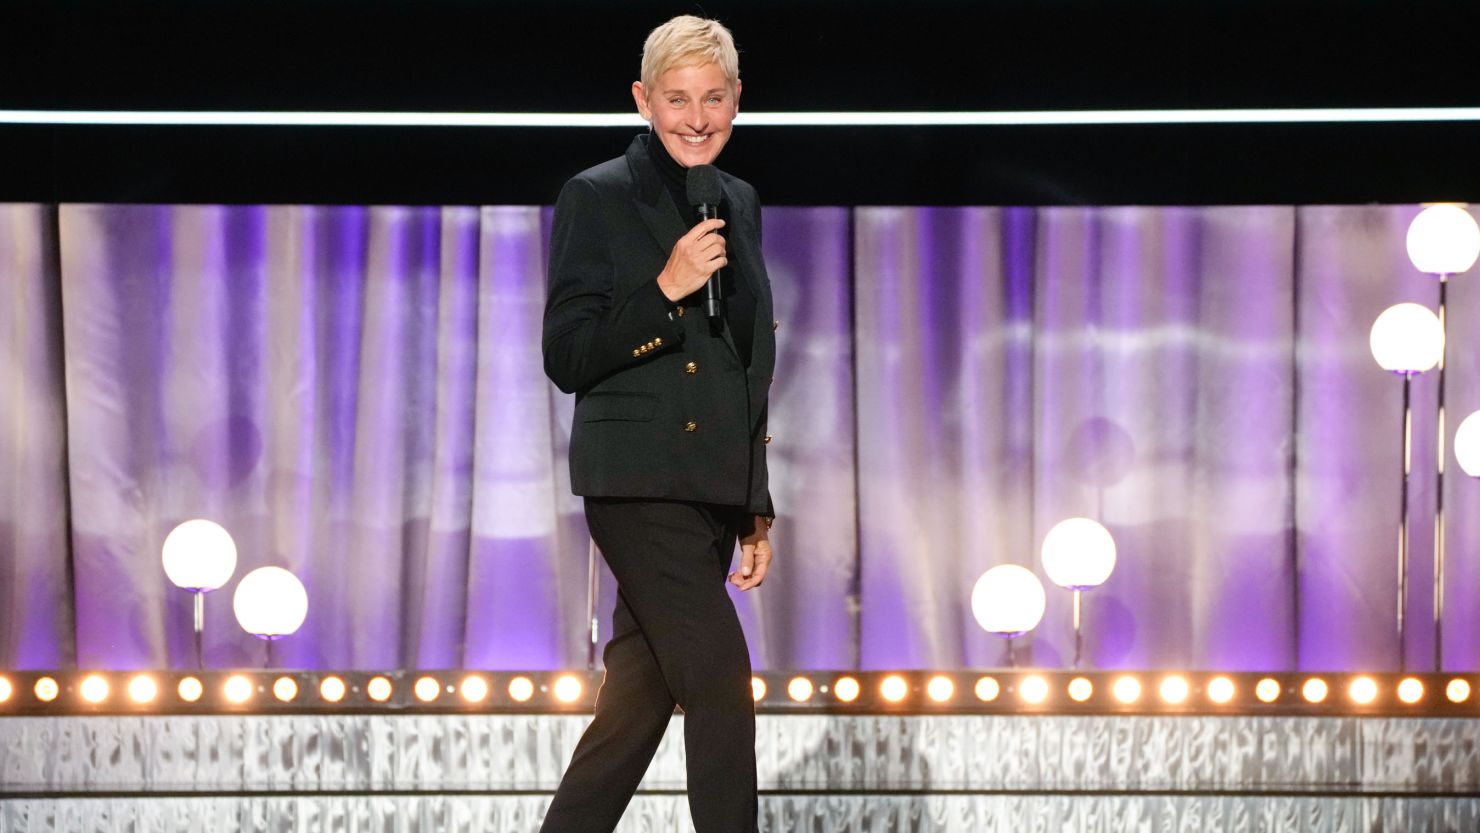 Ellen DeGeneres, pictured here during a special celebrating Carol Burnett, is currently on a new stand-up comedy tour.